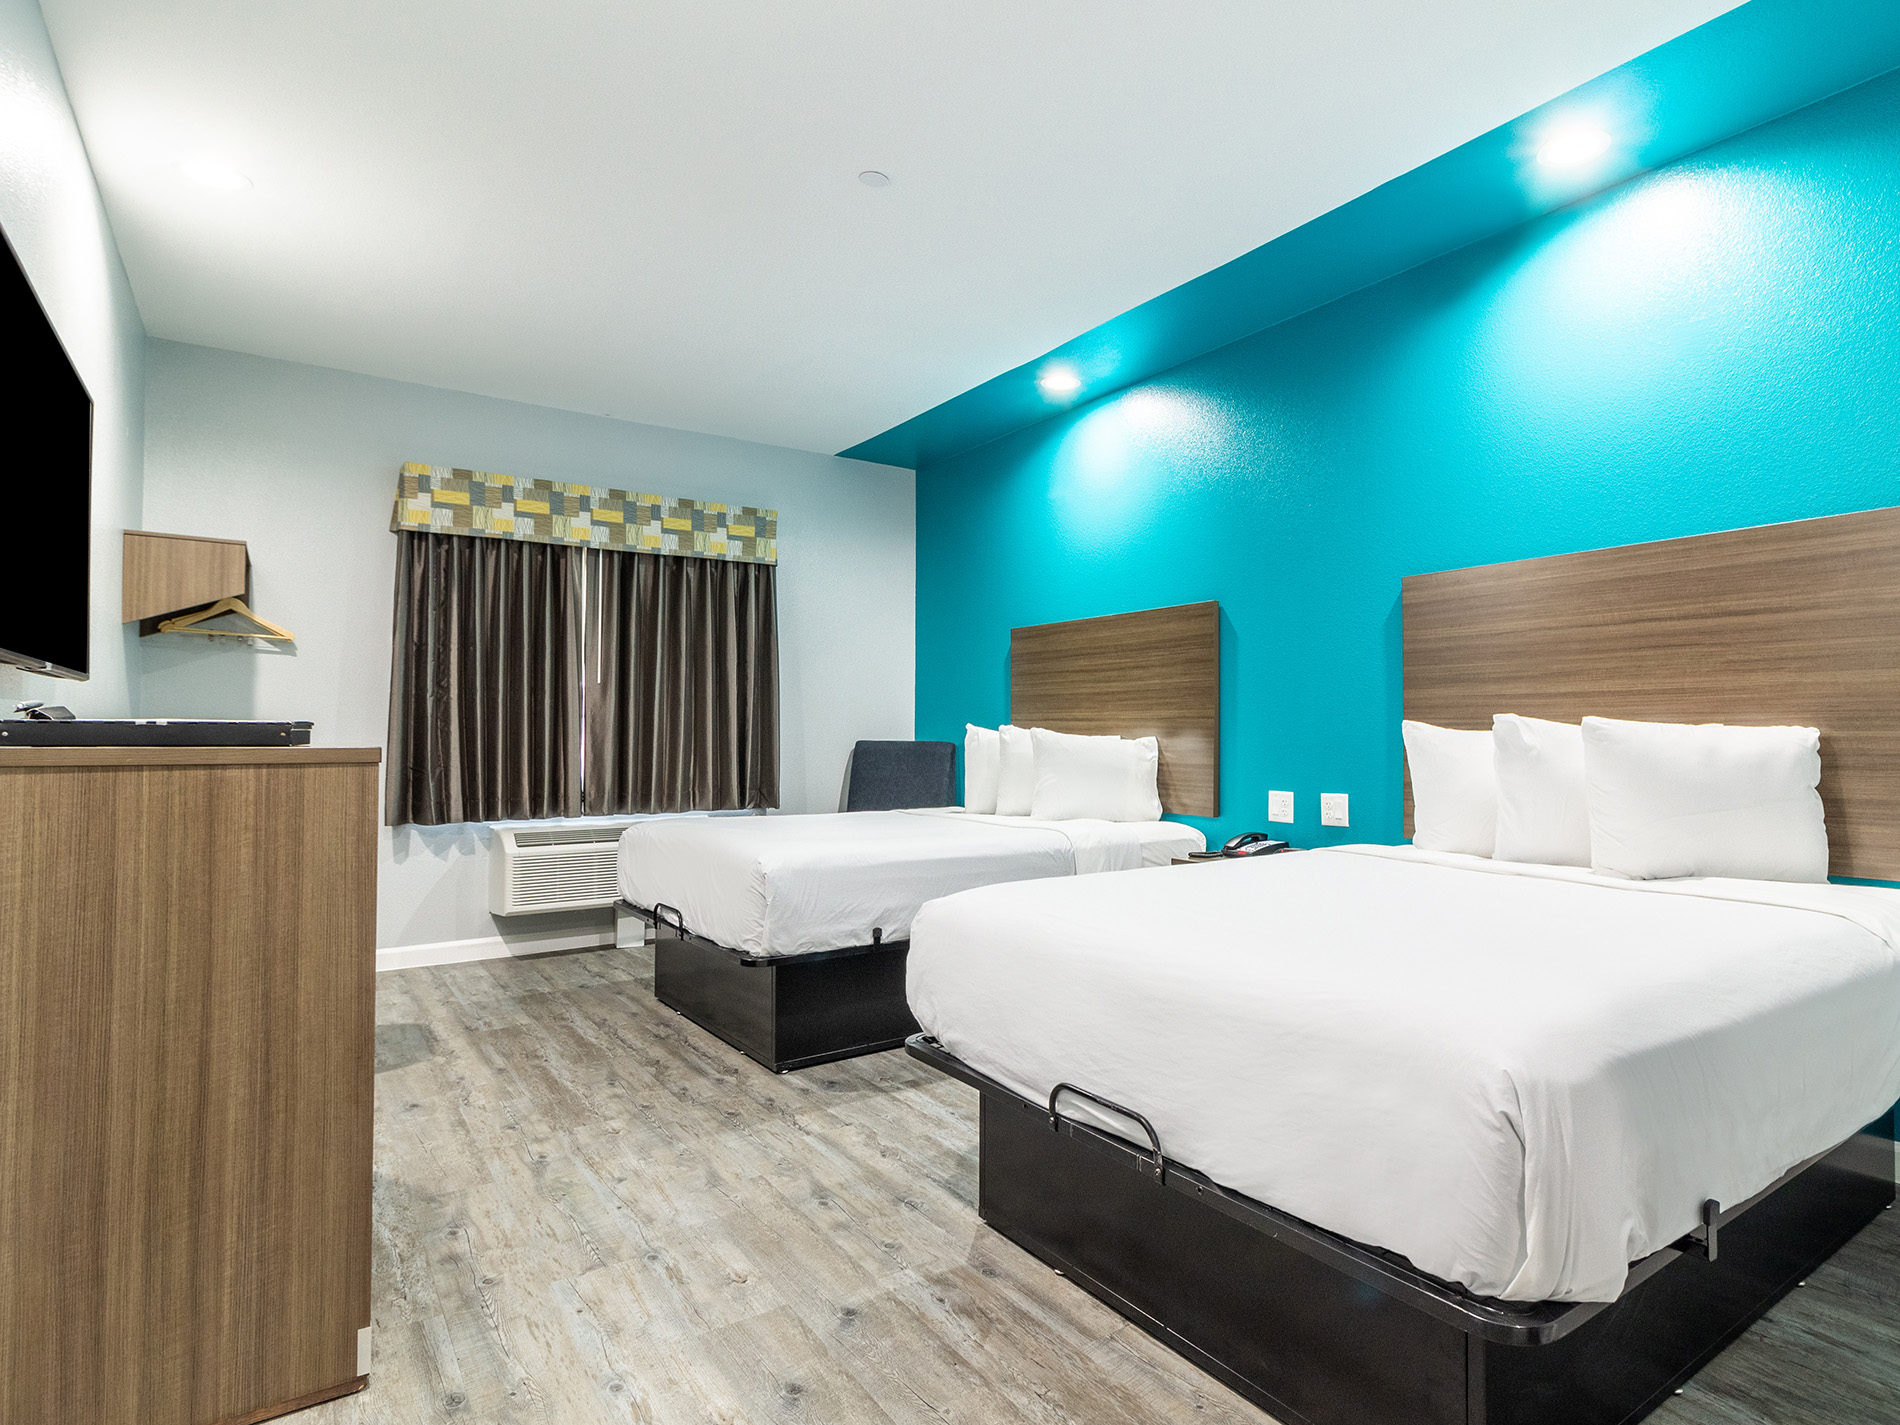 abvi guest room with bright blue walls and two queen bed with white linens